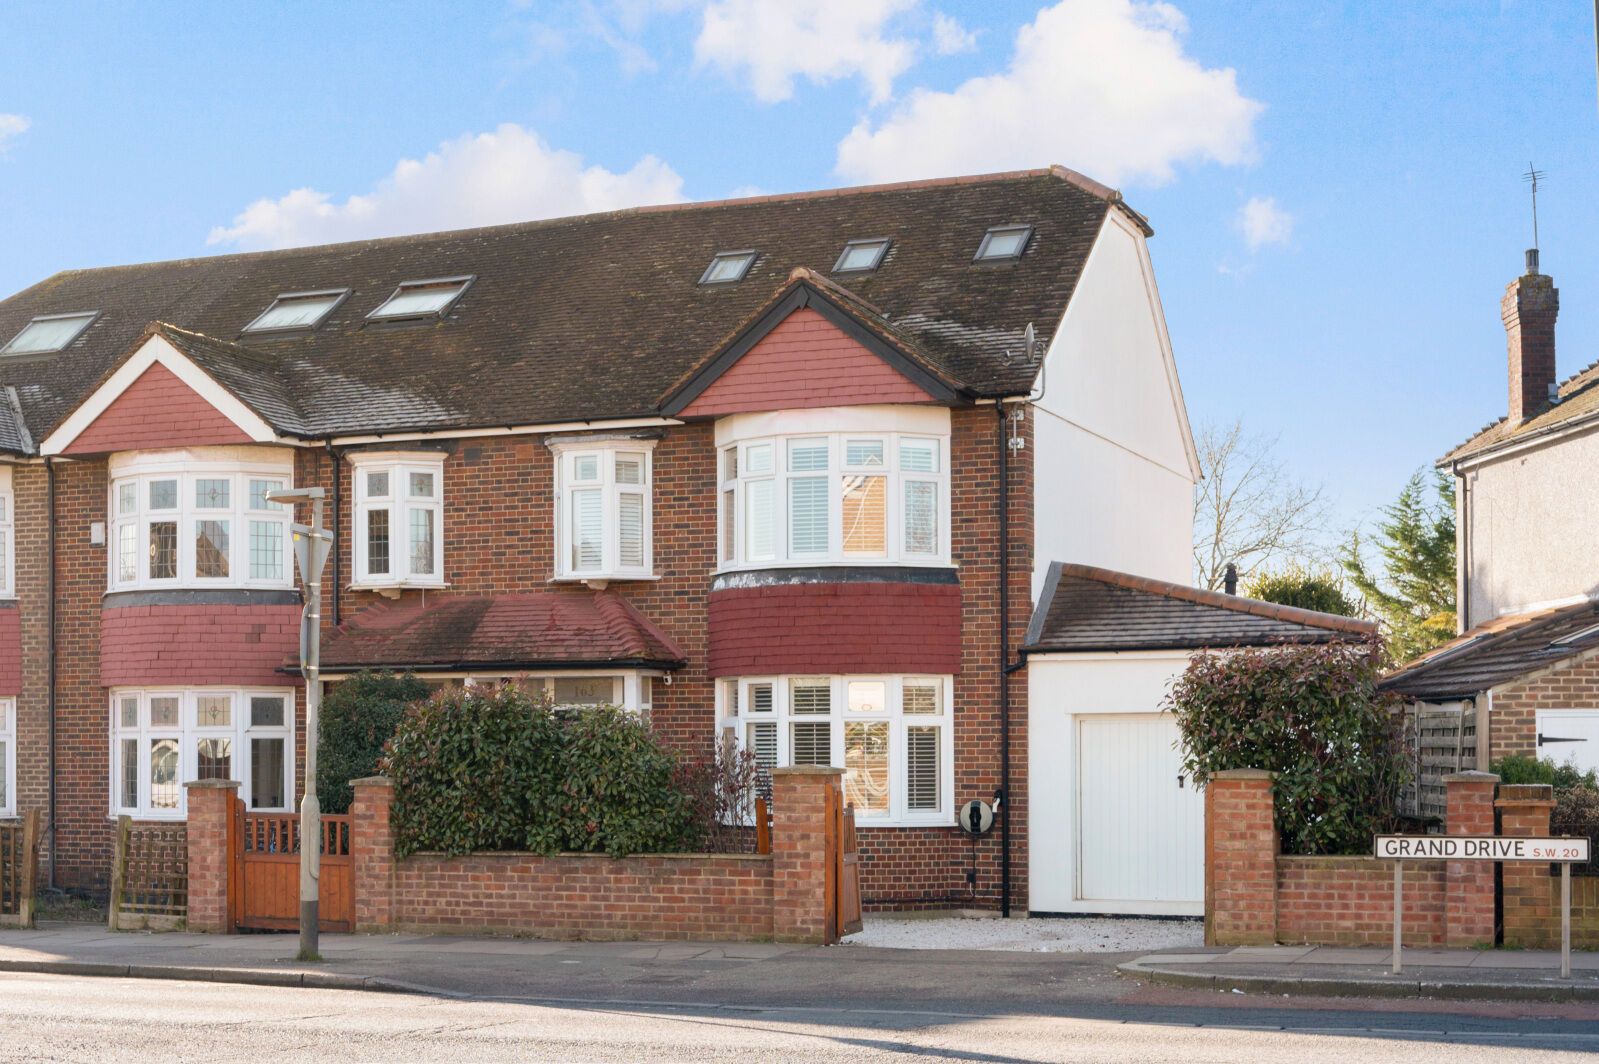 4 bedroom semi detached house for sale Grand Drive, Raynes Park, SW20, main image